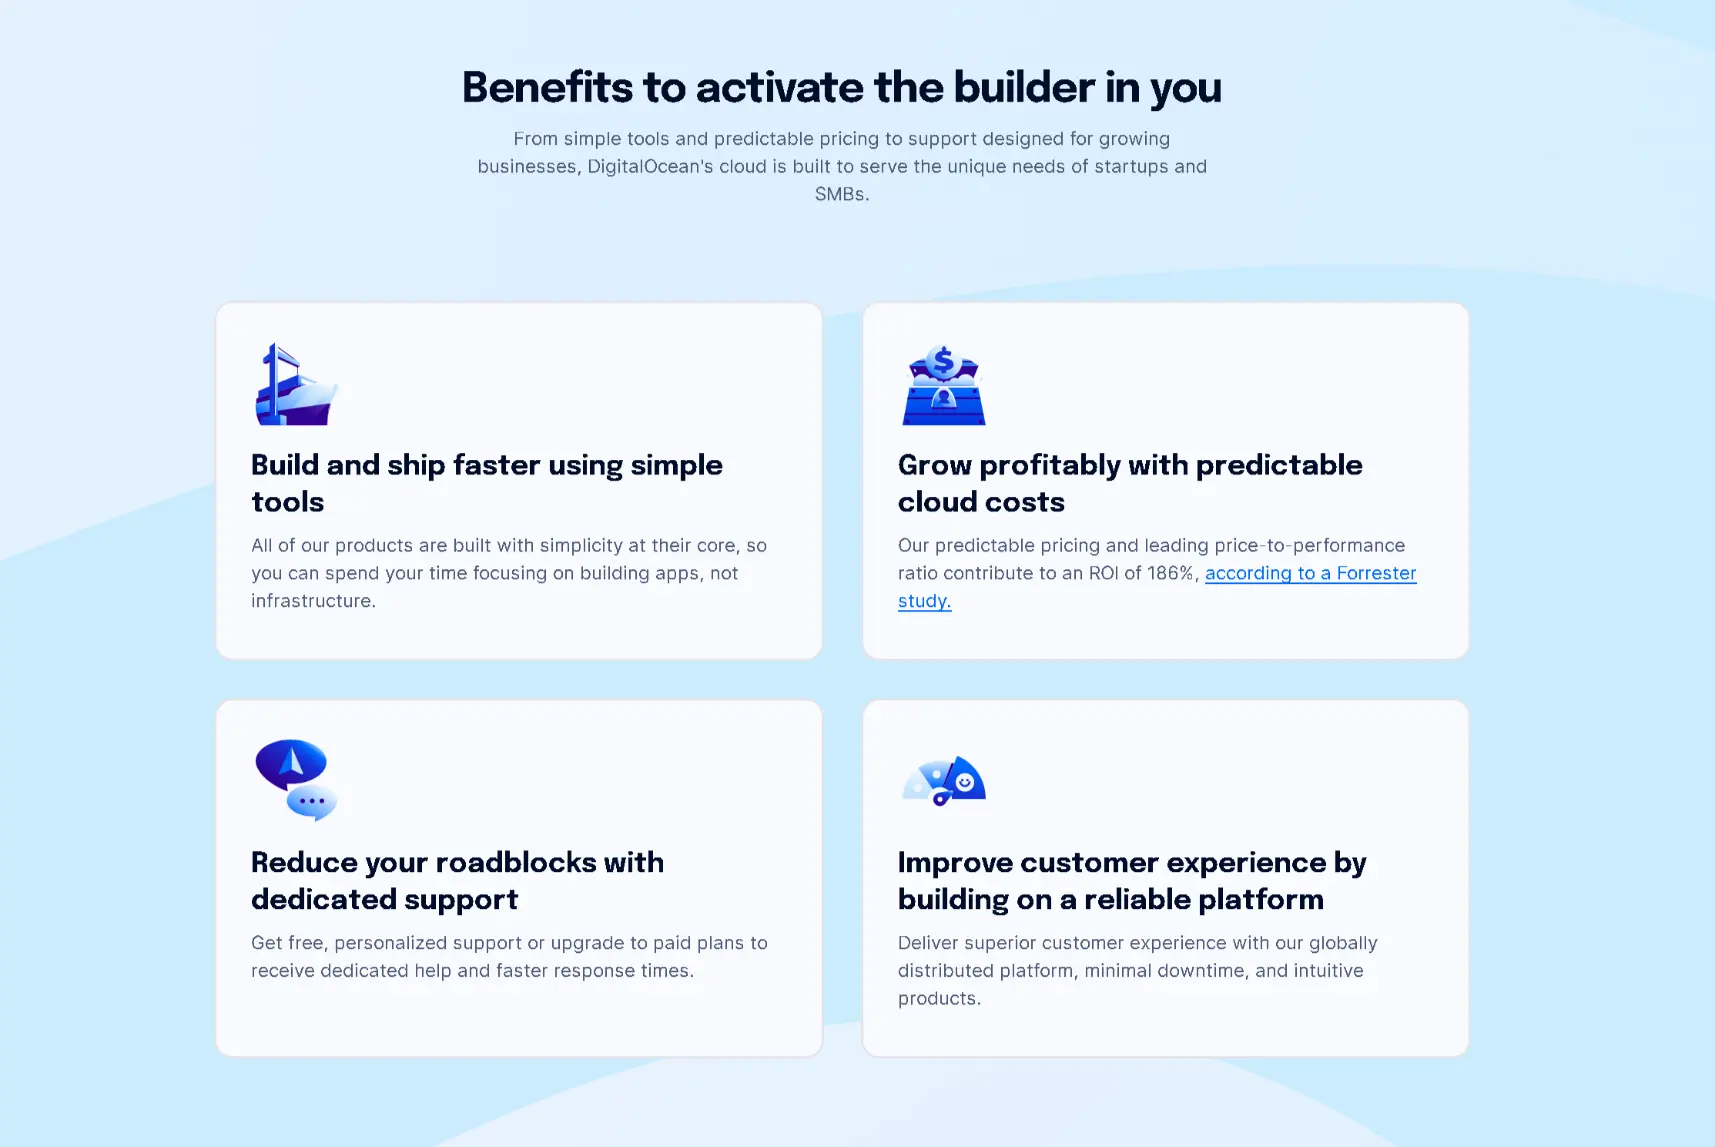 Benefits and used cases of DigitalOcean